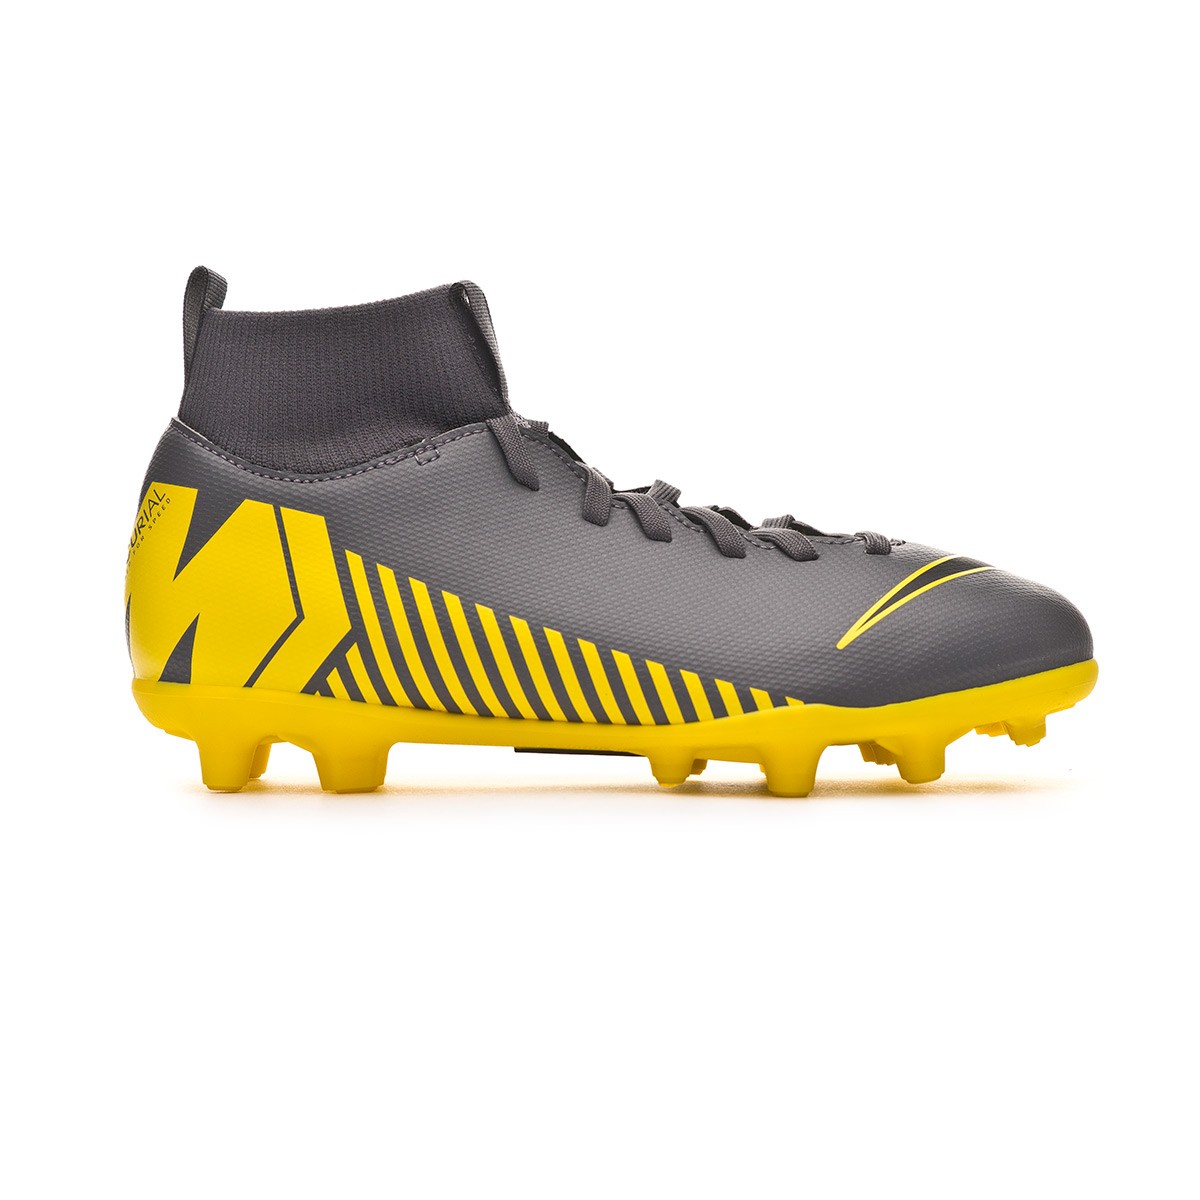 grey and yellow mercurials